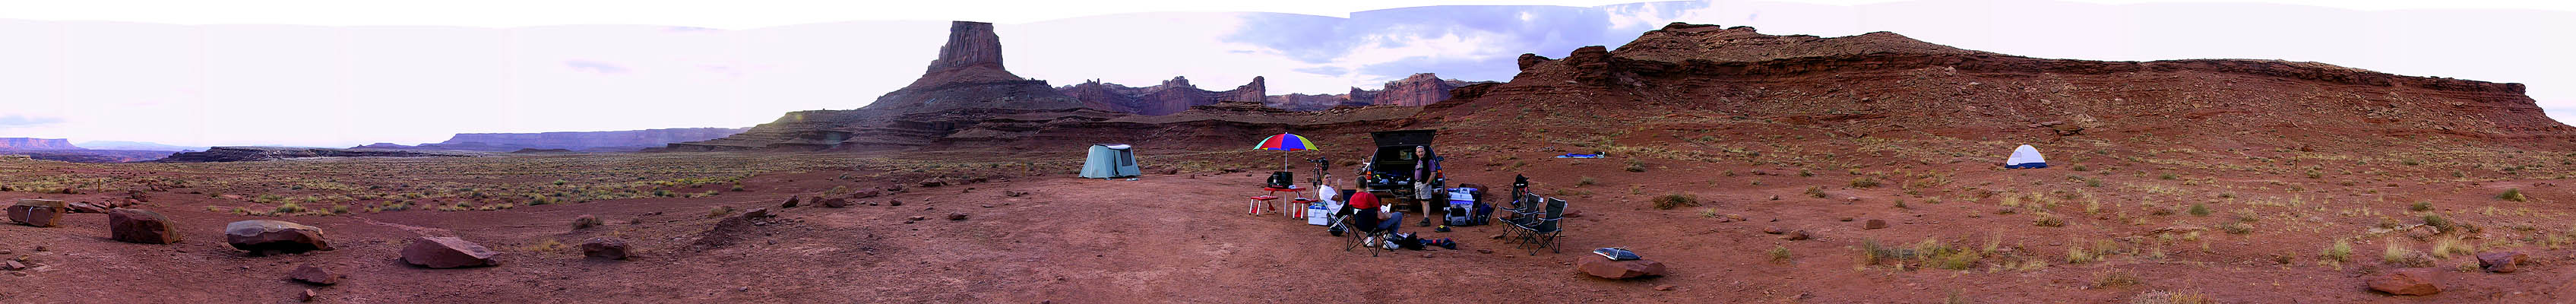 White Rim 2001: Day 1: Airport Camp A (Panoramic)